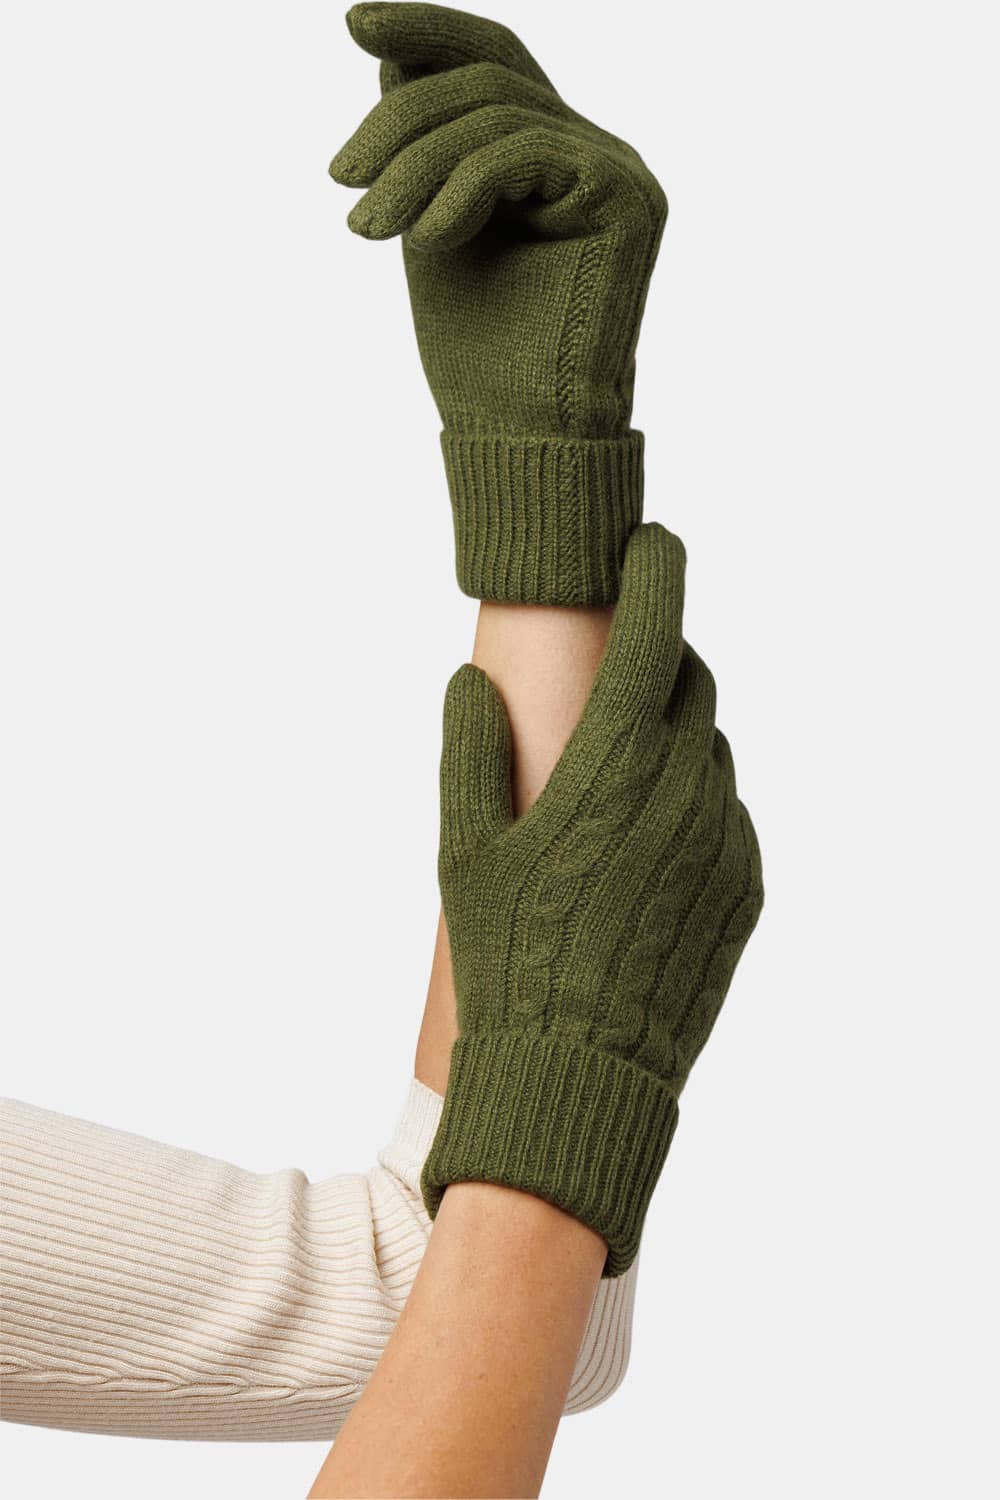 Woman's hands wearing Fishers Finery Olive Green Cable Knit Pure Cashmere Gloves